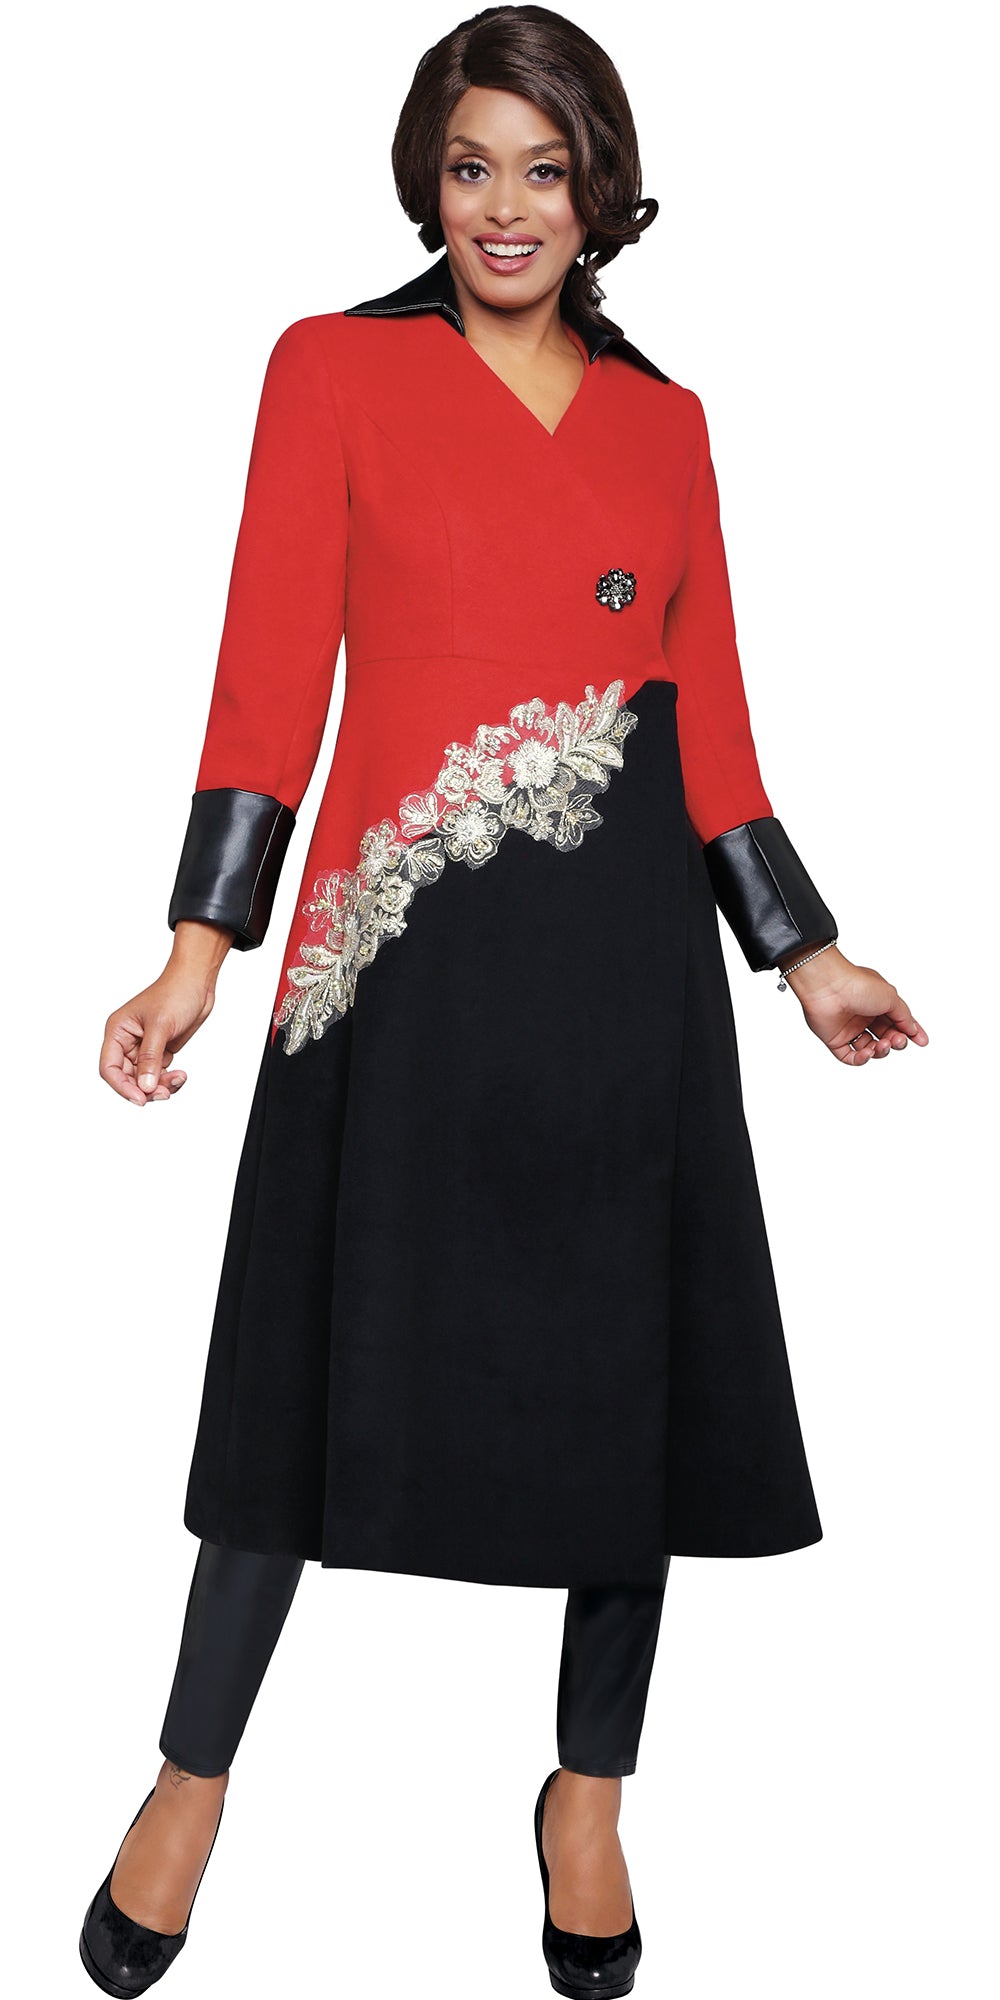 DCC - DCC101CT - Black / White / Red - Womens Cuffed Long Coat